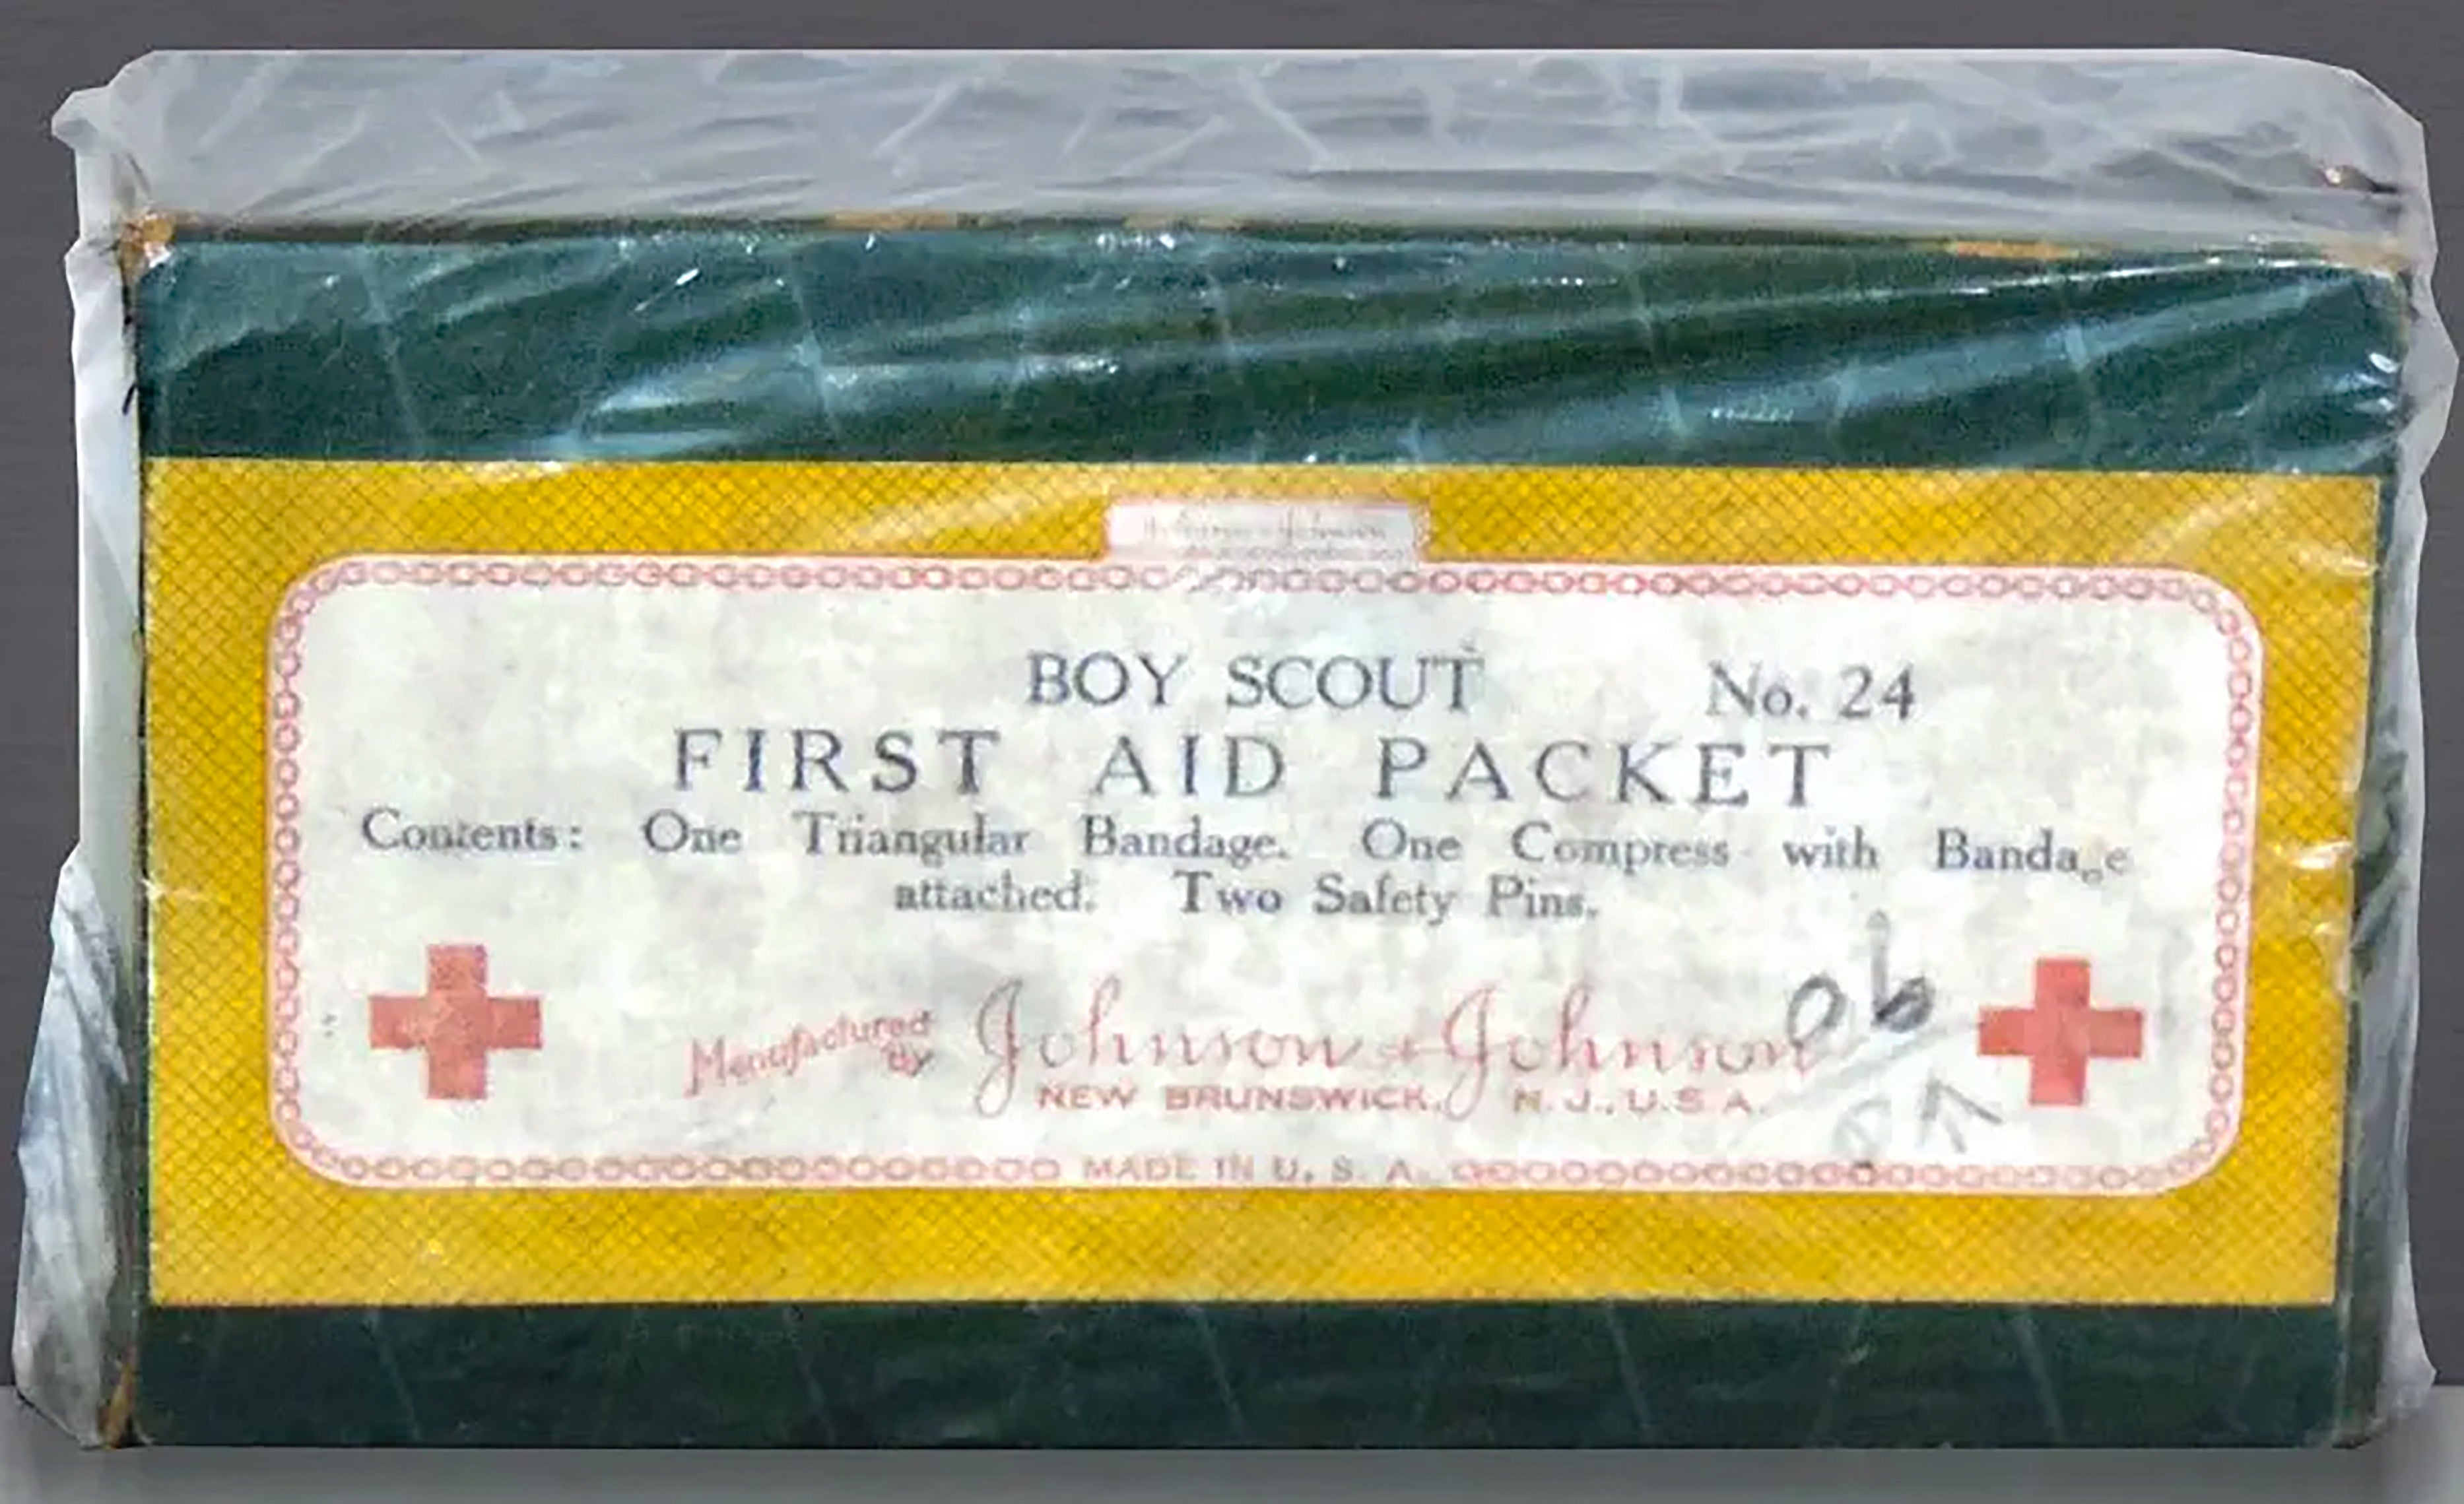 First-aid packet for Boy Scouts